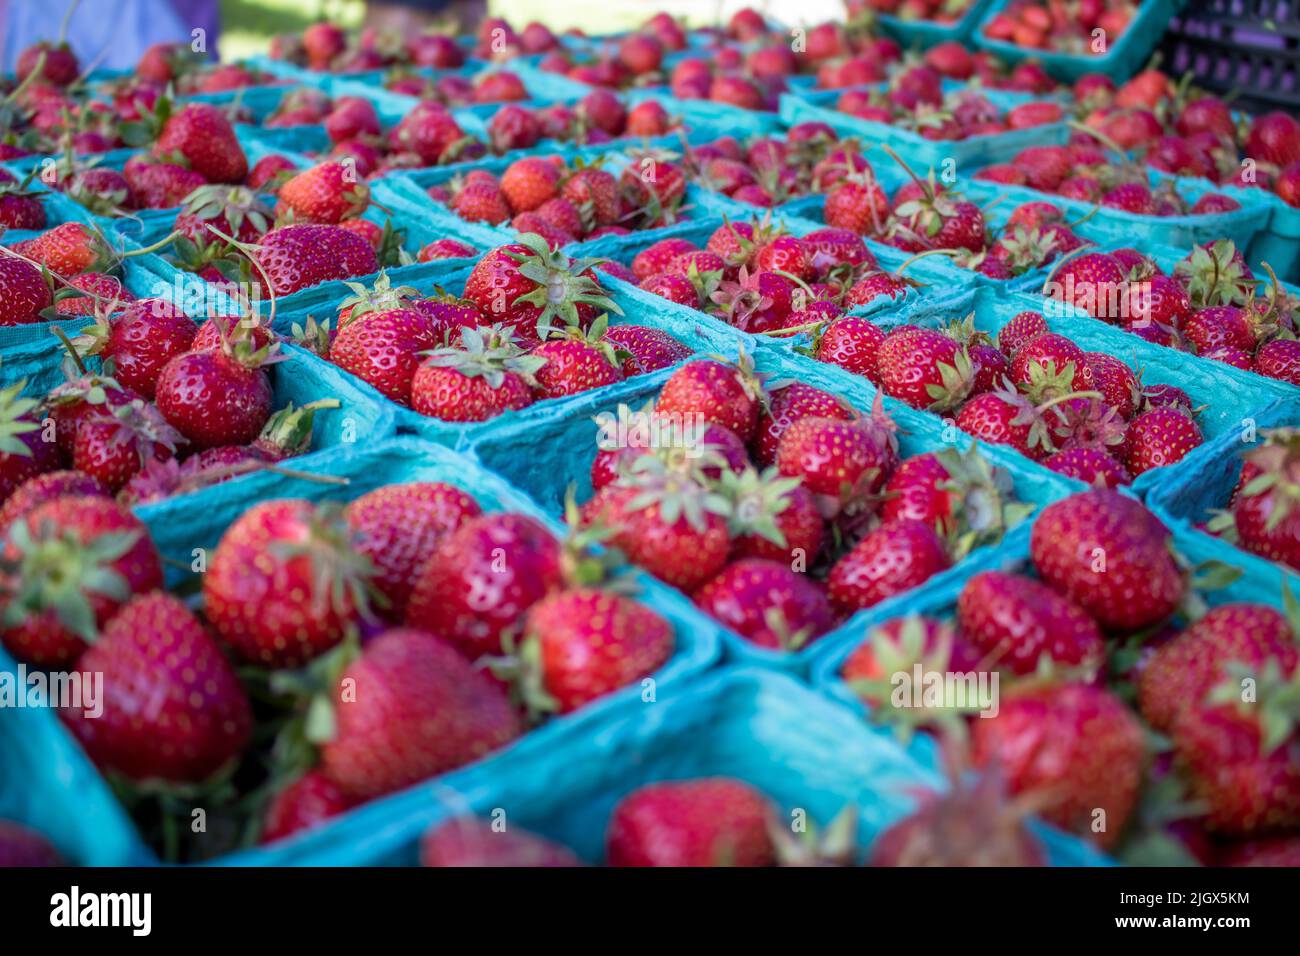 freshly picked strawberries in a teal punnet at a framers market outdoors Stock Photo